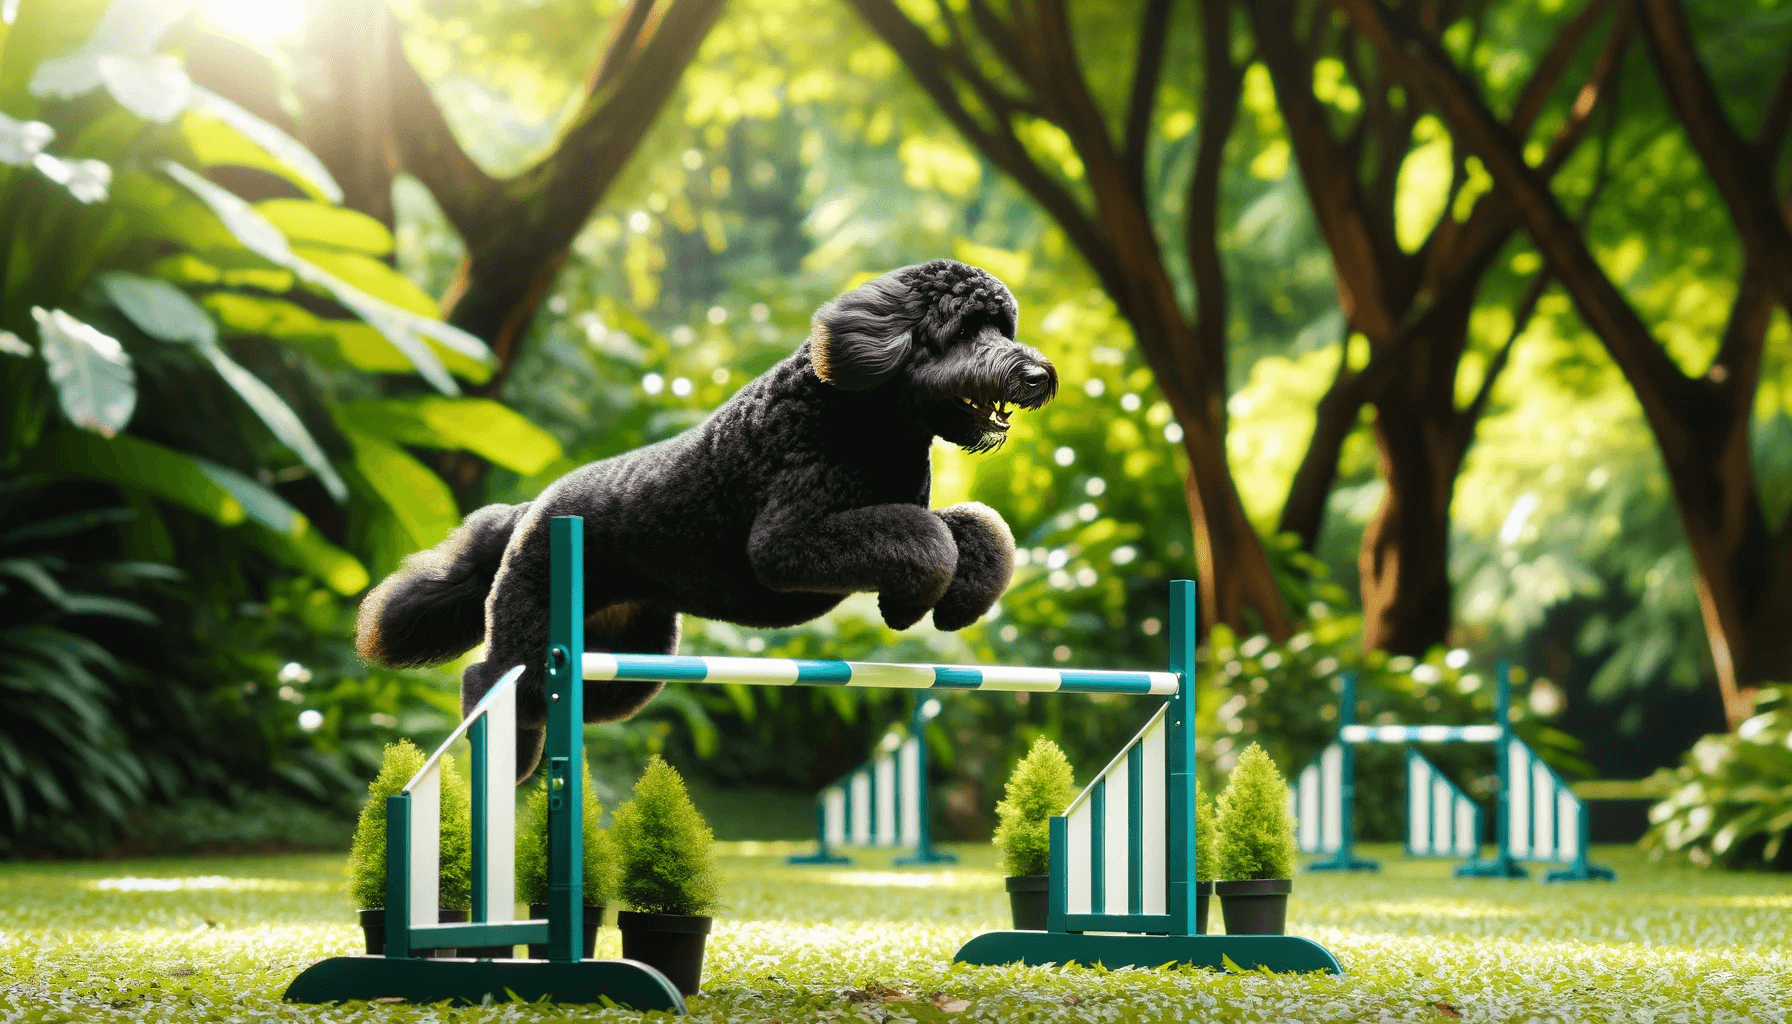 Black Aussiedoodle engaged in agility training, leaping over a hurdle in a lush park